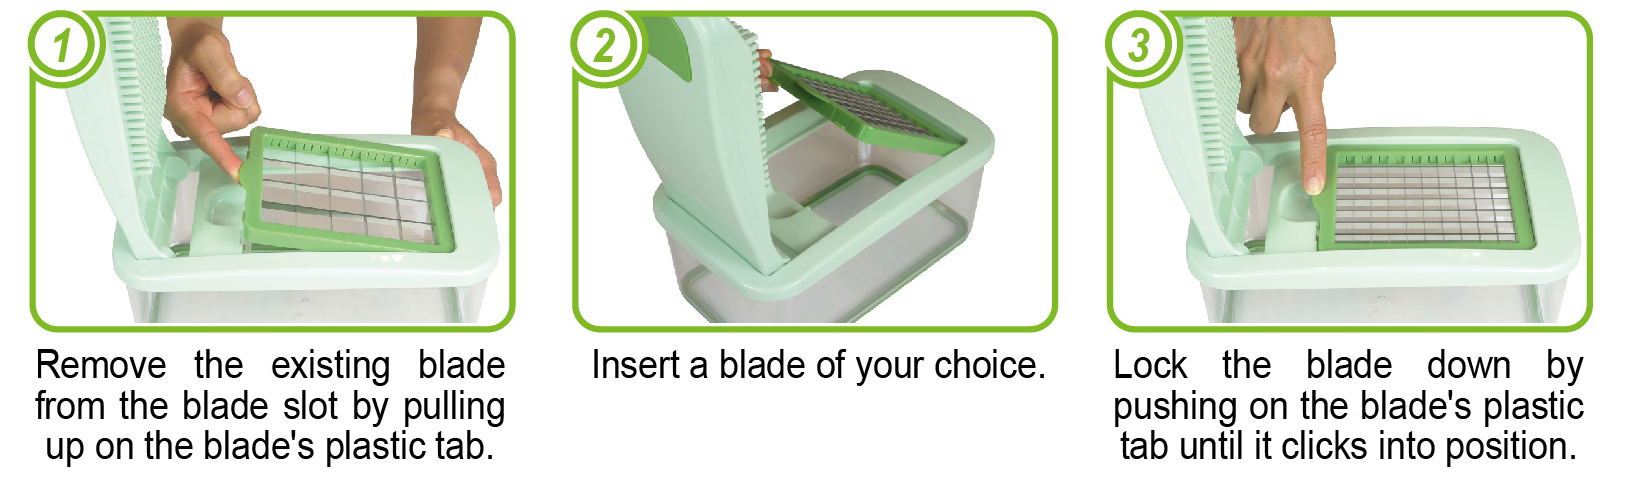 https://www.brieftons.com/wp-content/uploads/2021/04/How-to-change-blades.png